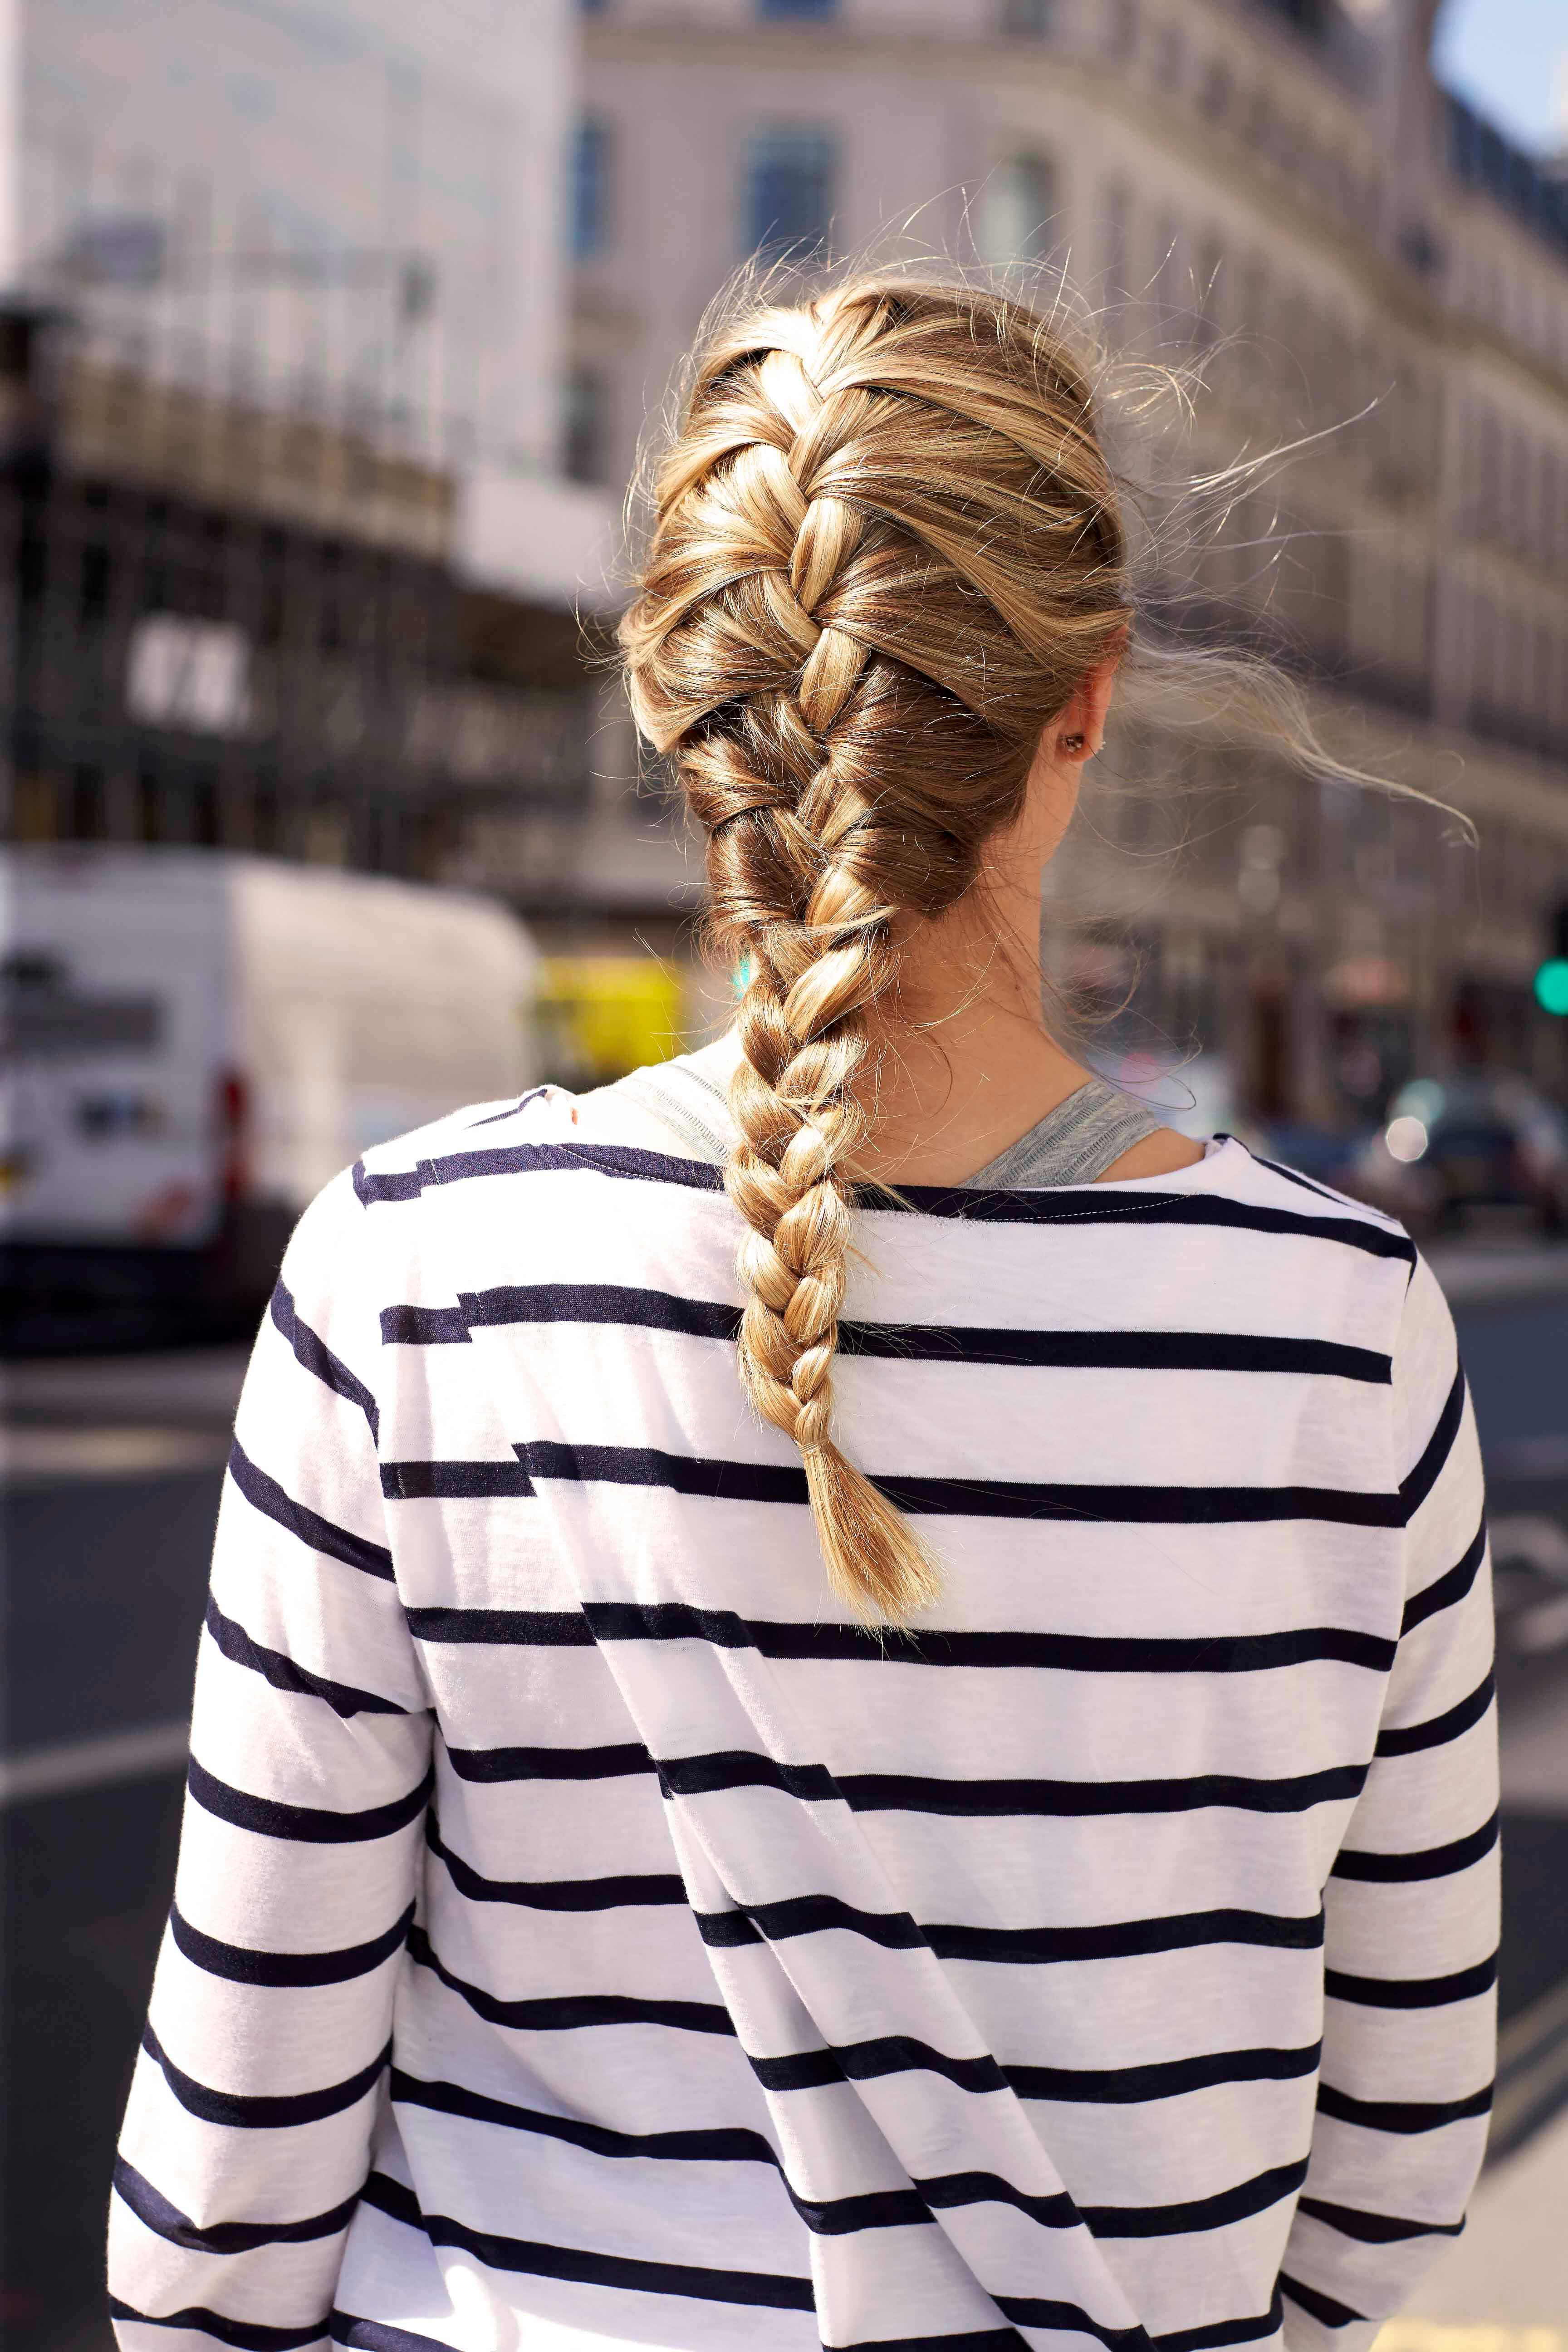 25 Famous and Latest French Twist Hairstyles for Women | Styles at Life